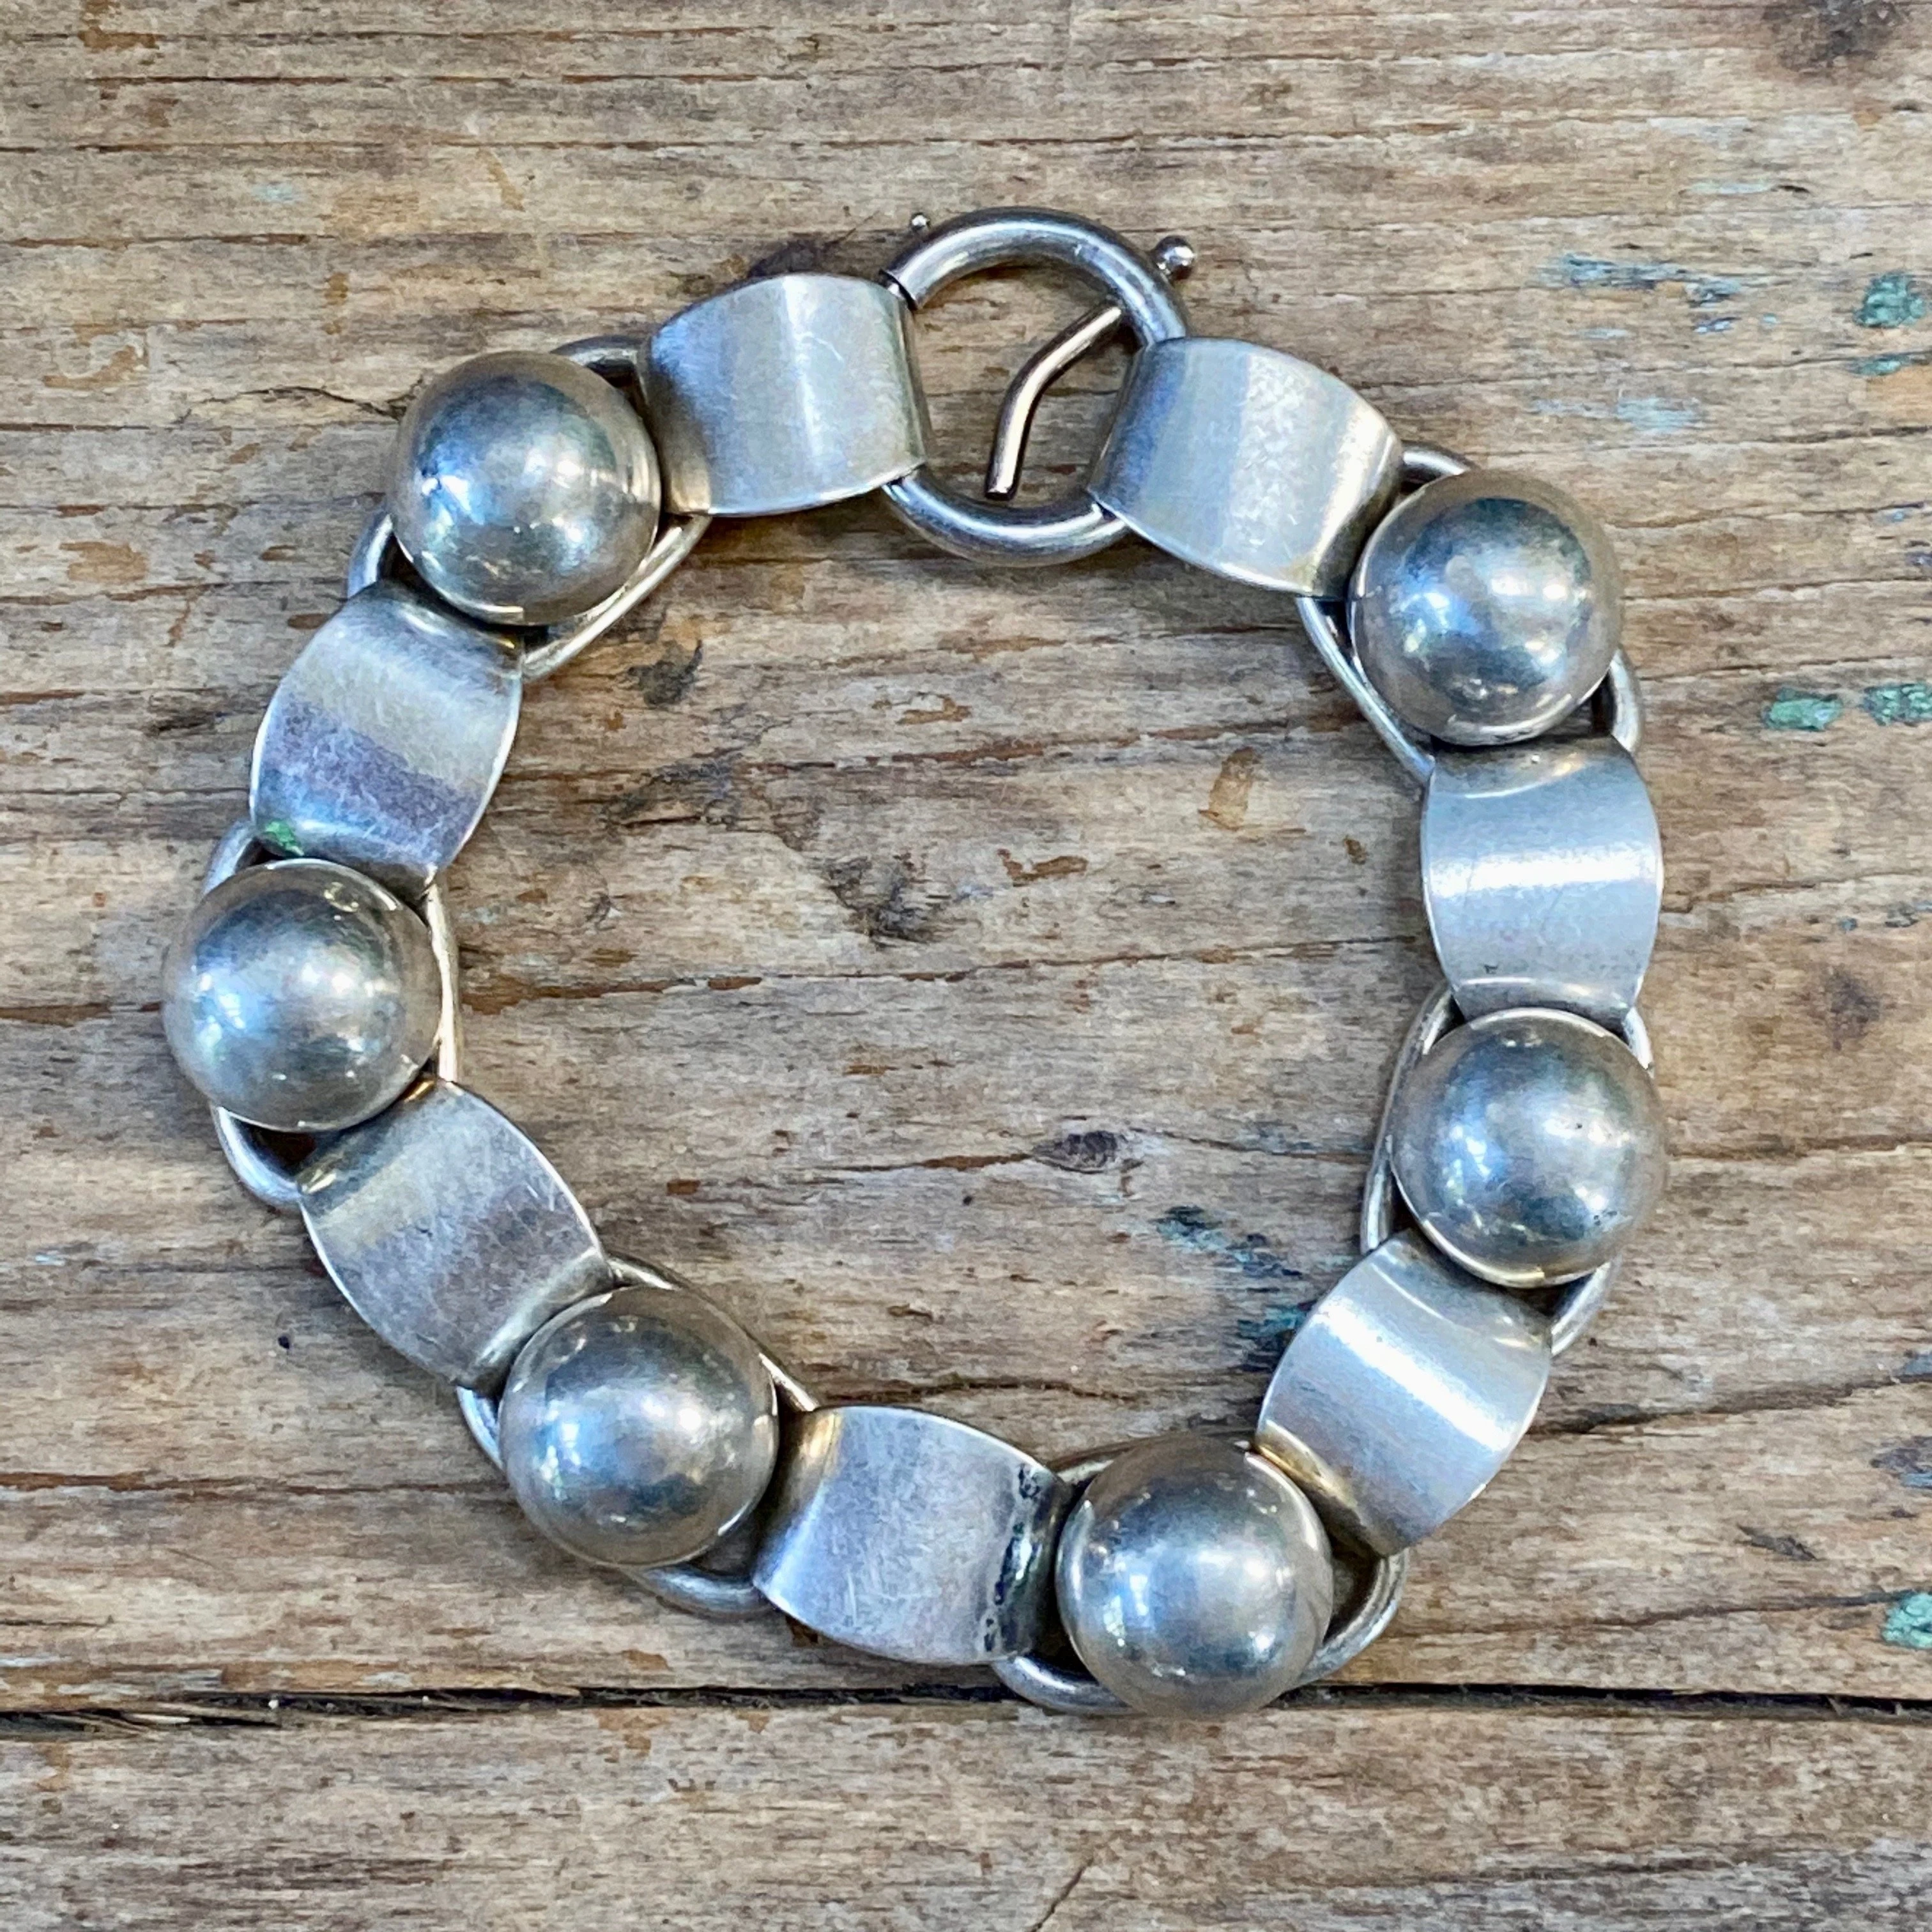 Napier Bookchain and Orb Bracelet in Sterling Silver 1930s